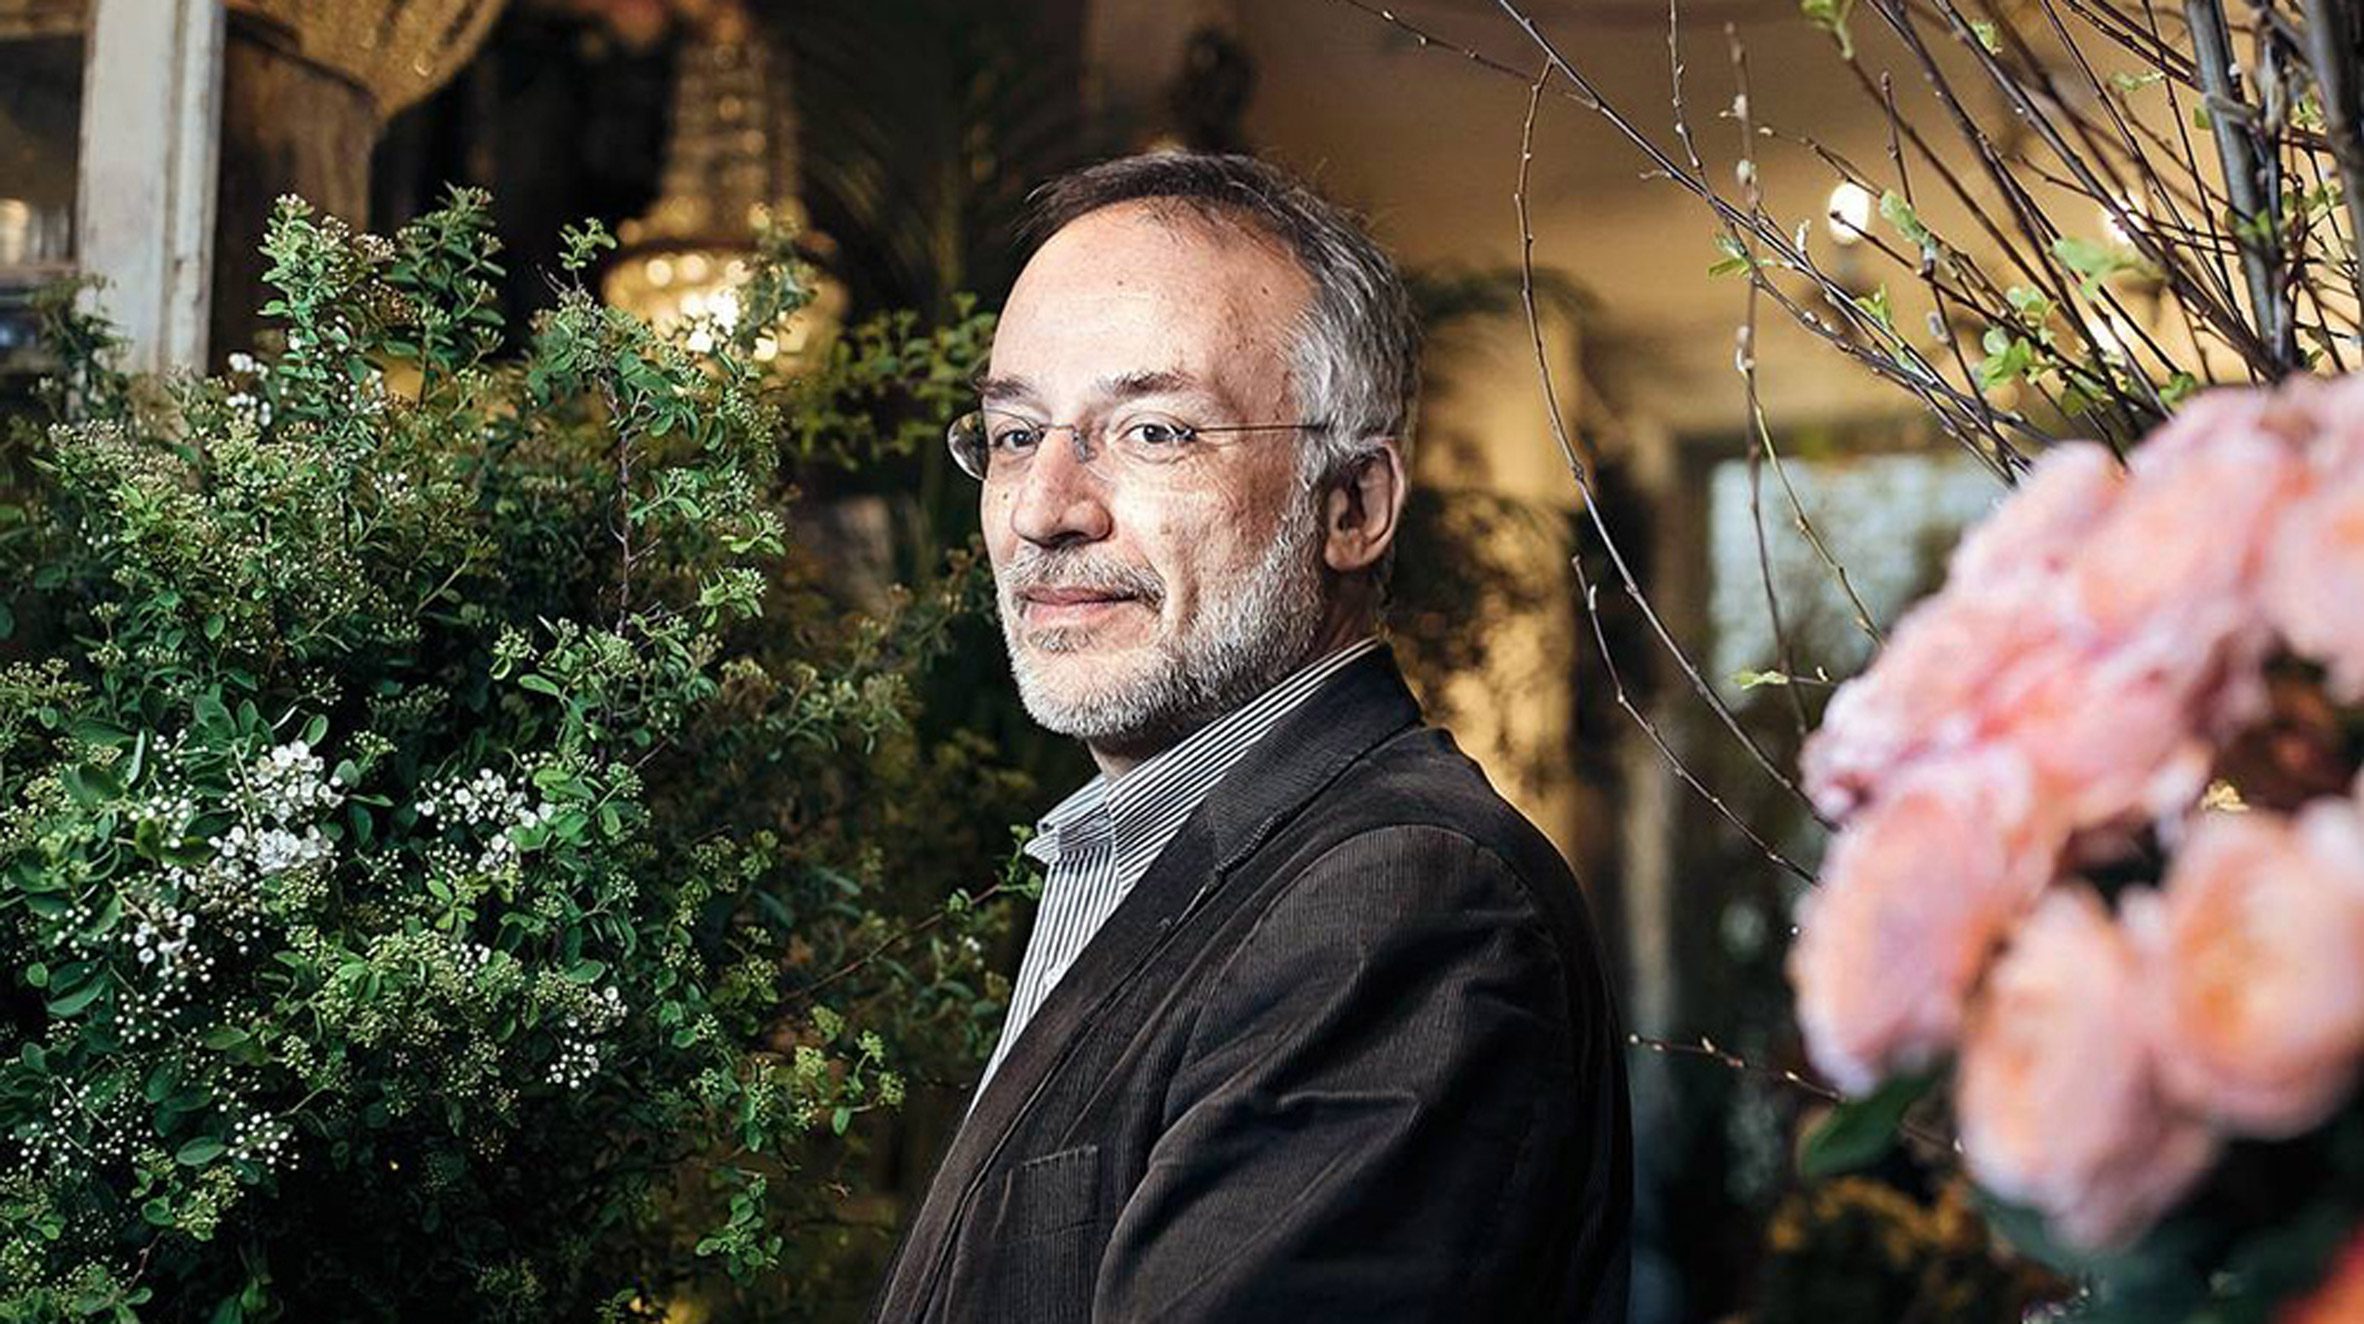 A portrait of Stefano Mancuso who is a plant scientist and Professor at the University of Florence 